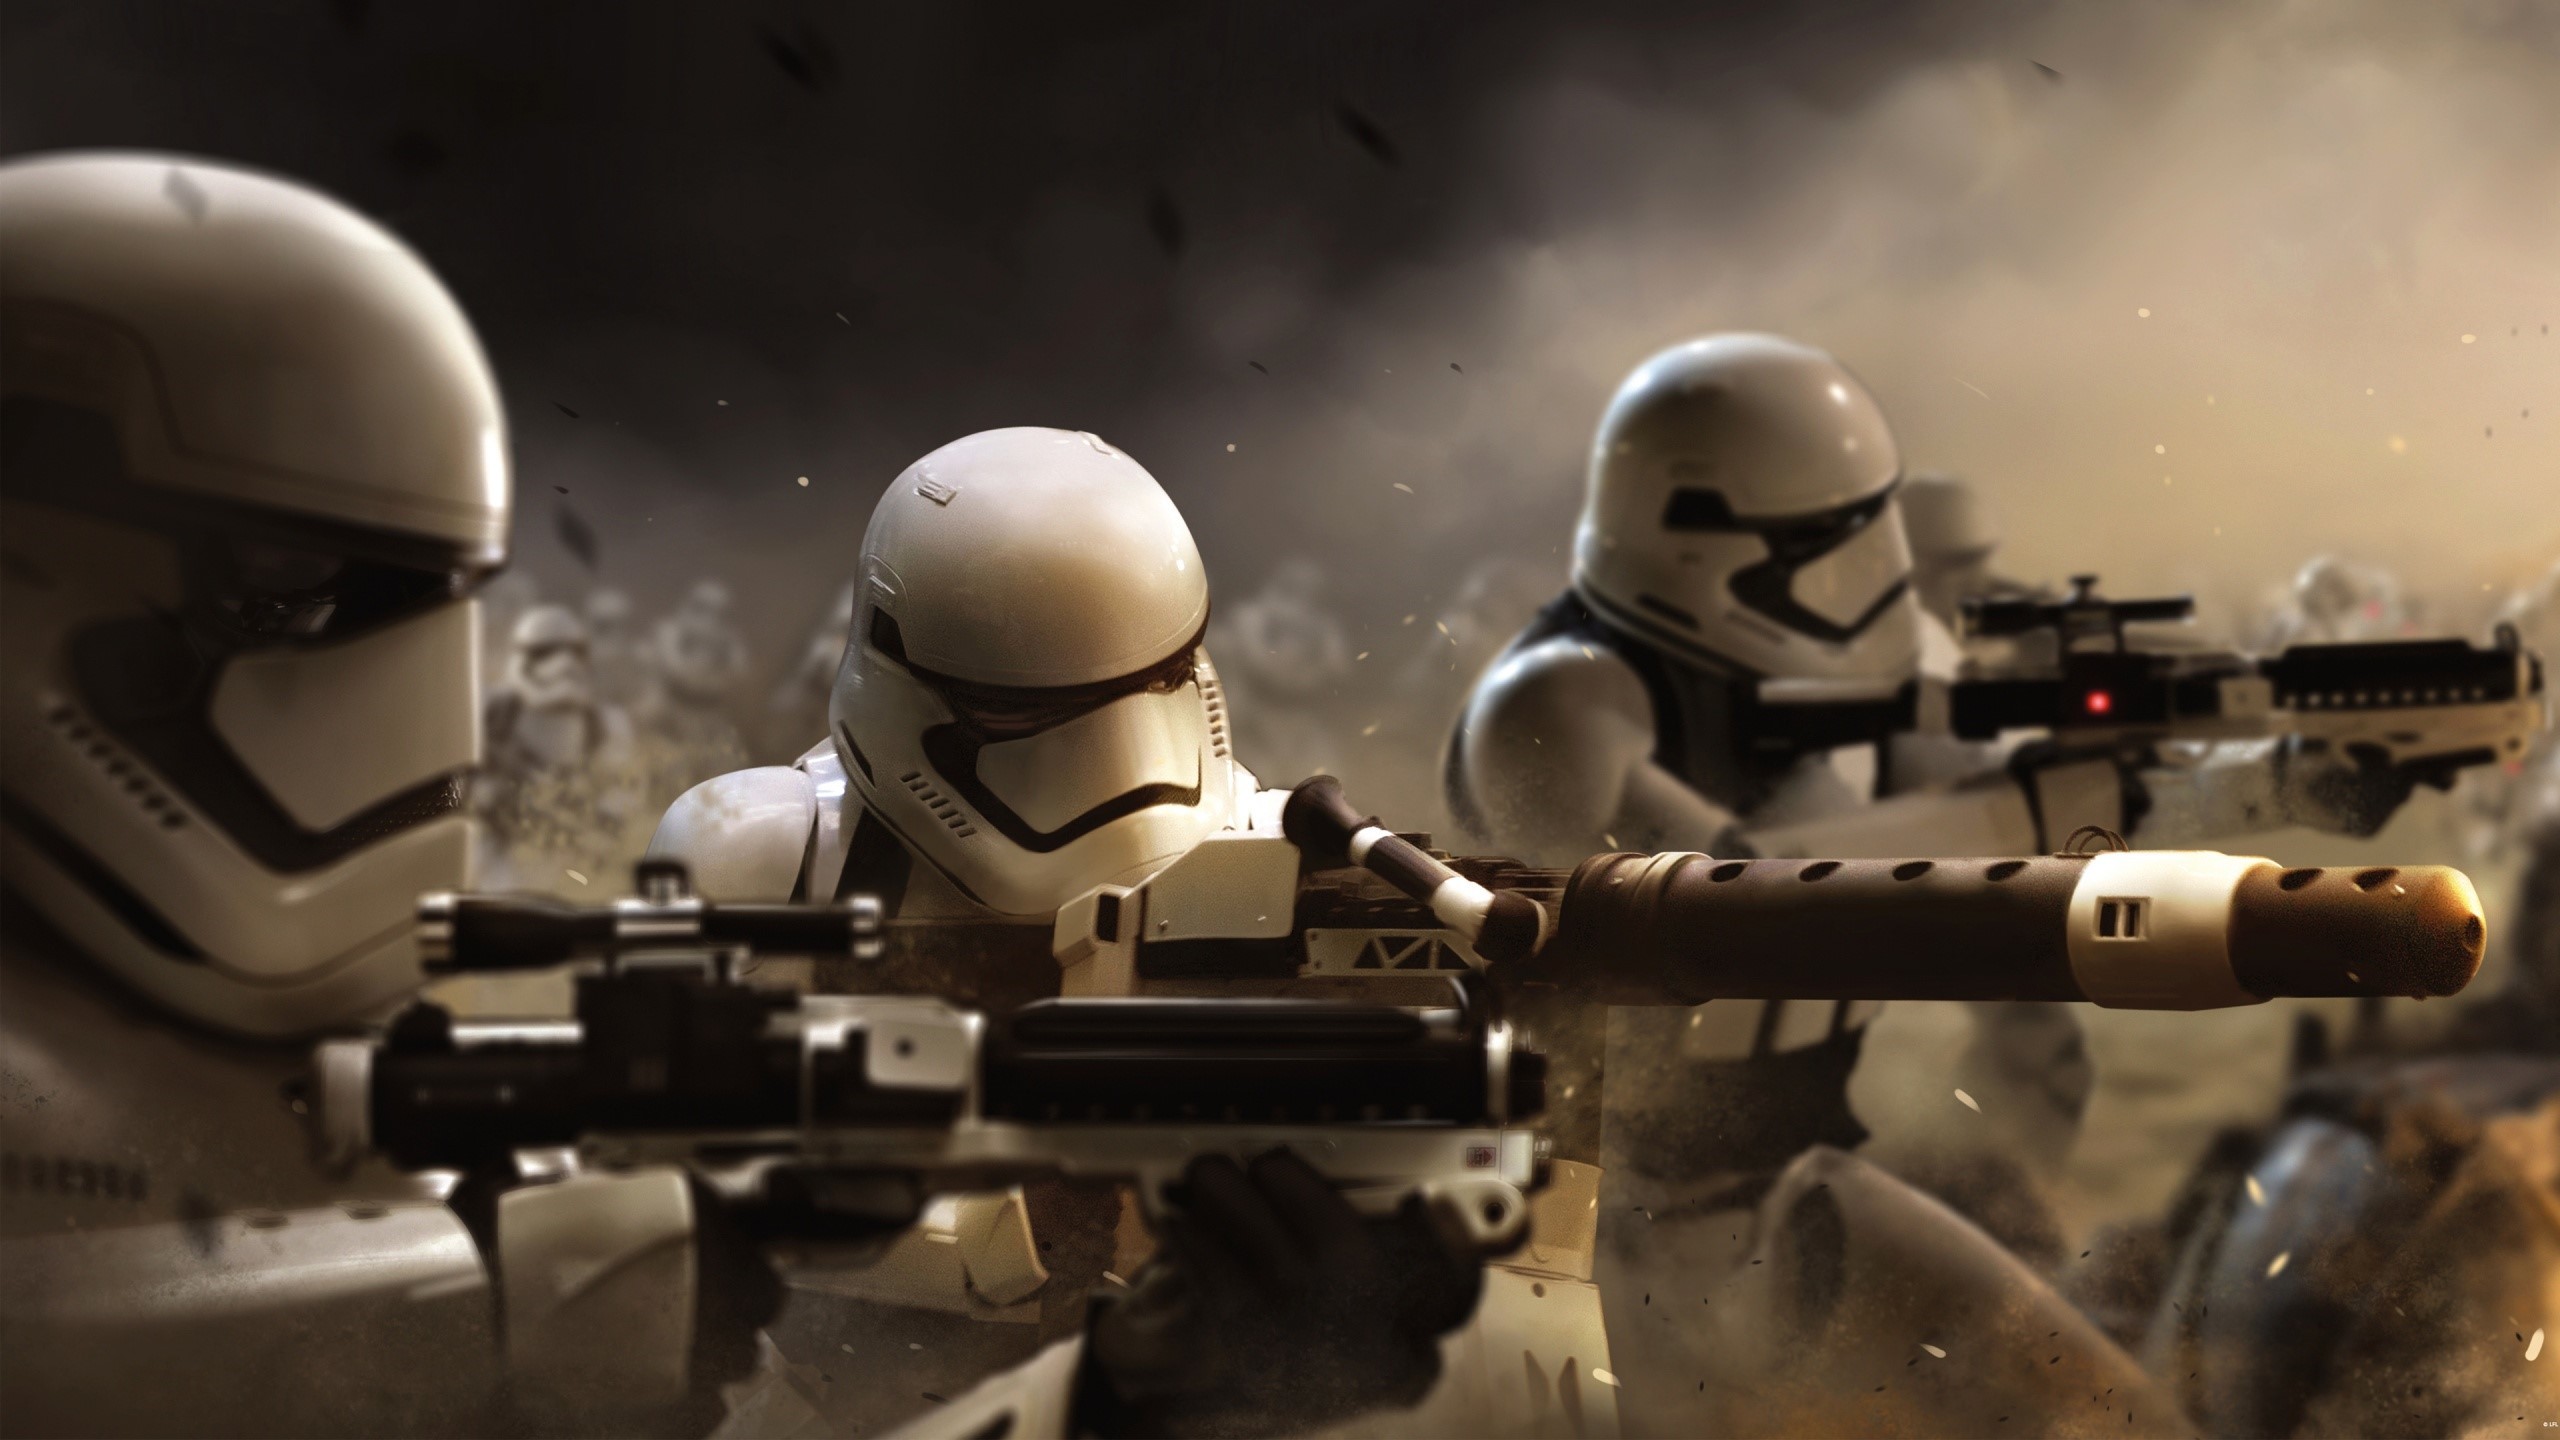 2560x1440 Wallpaper Stormtroopers Images